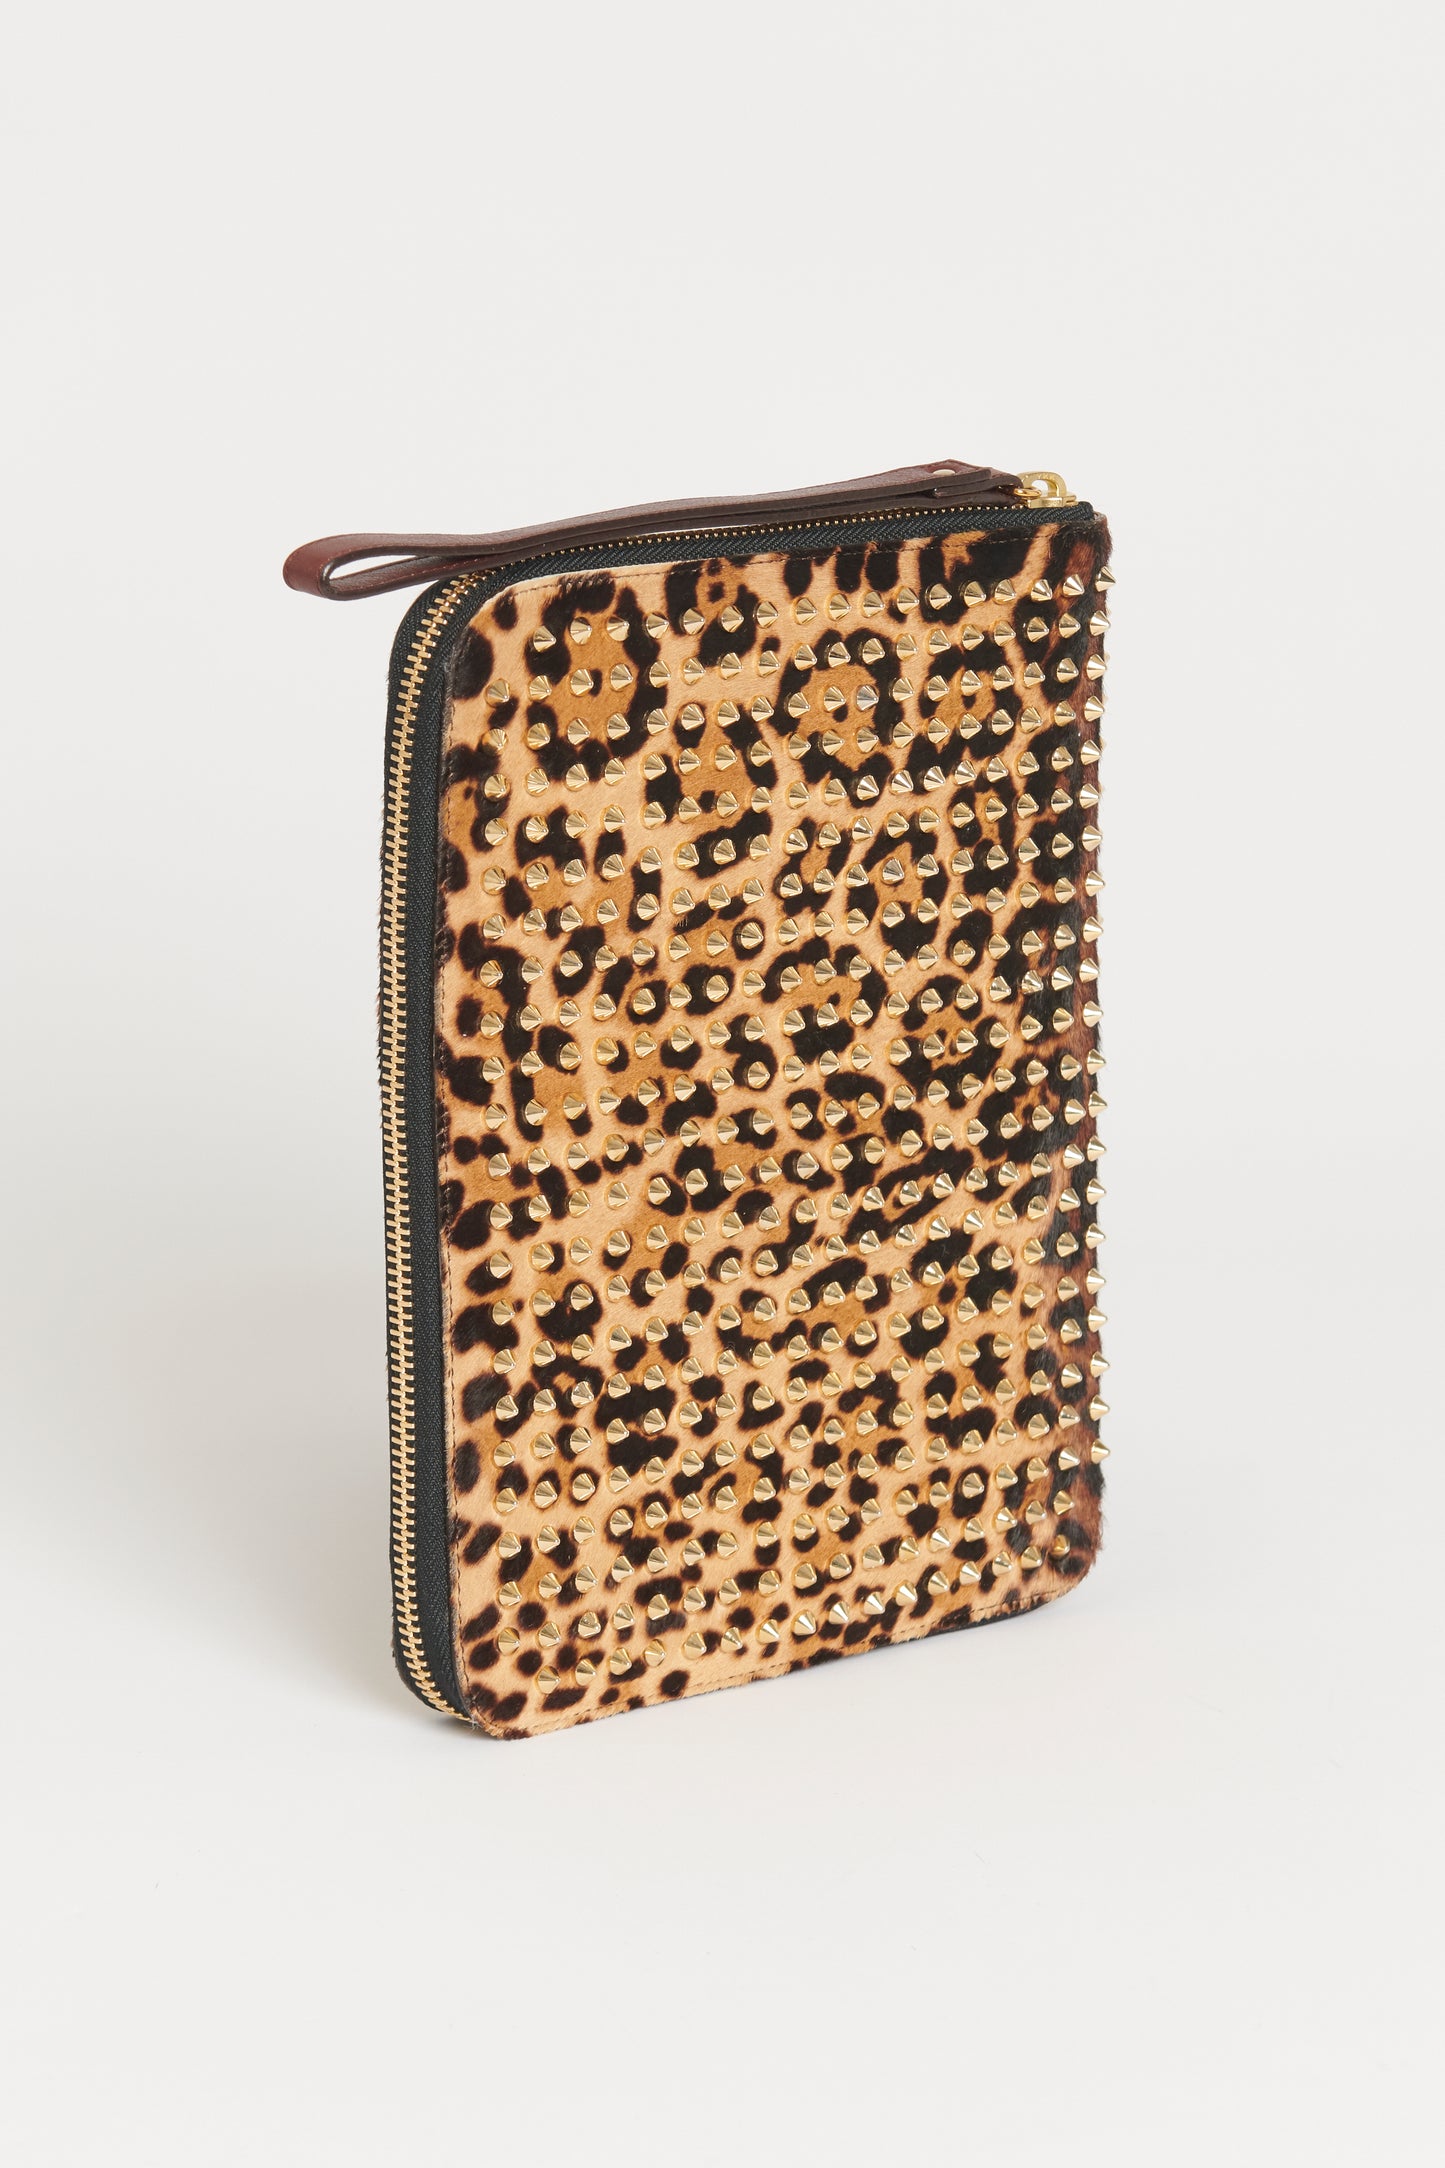 Leopard Studded Preowned iPad Case